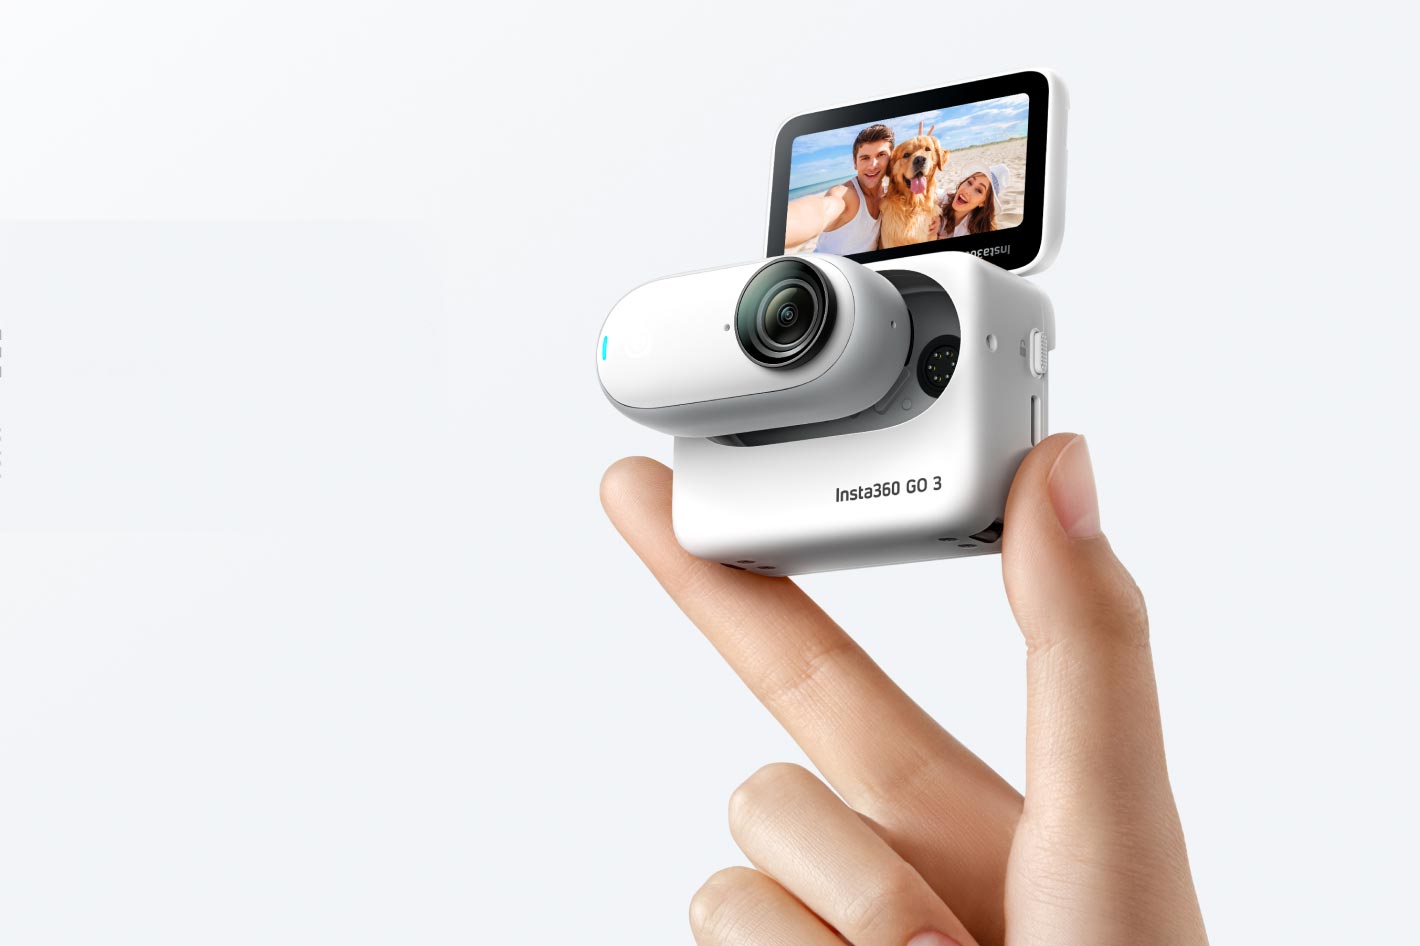 Insta360 GO 3: the world's smallest action camera